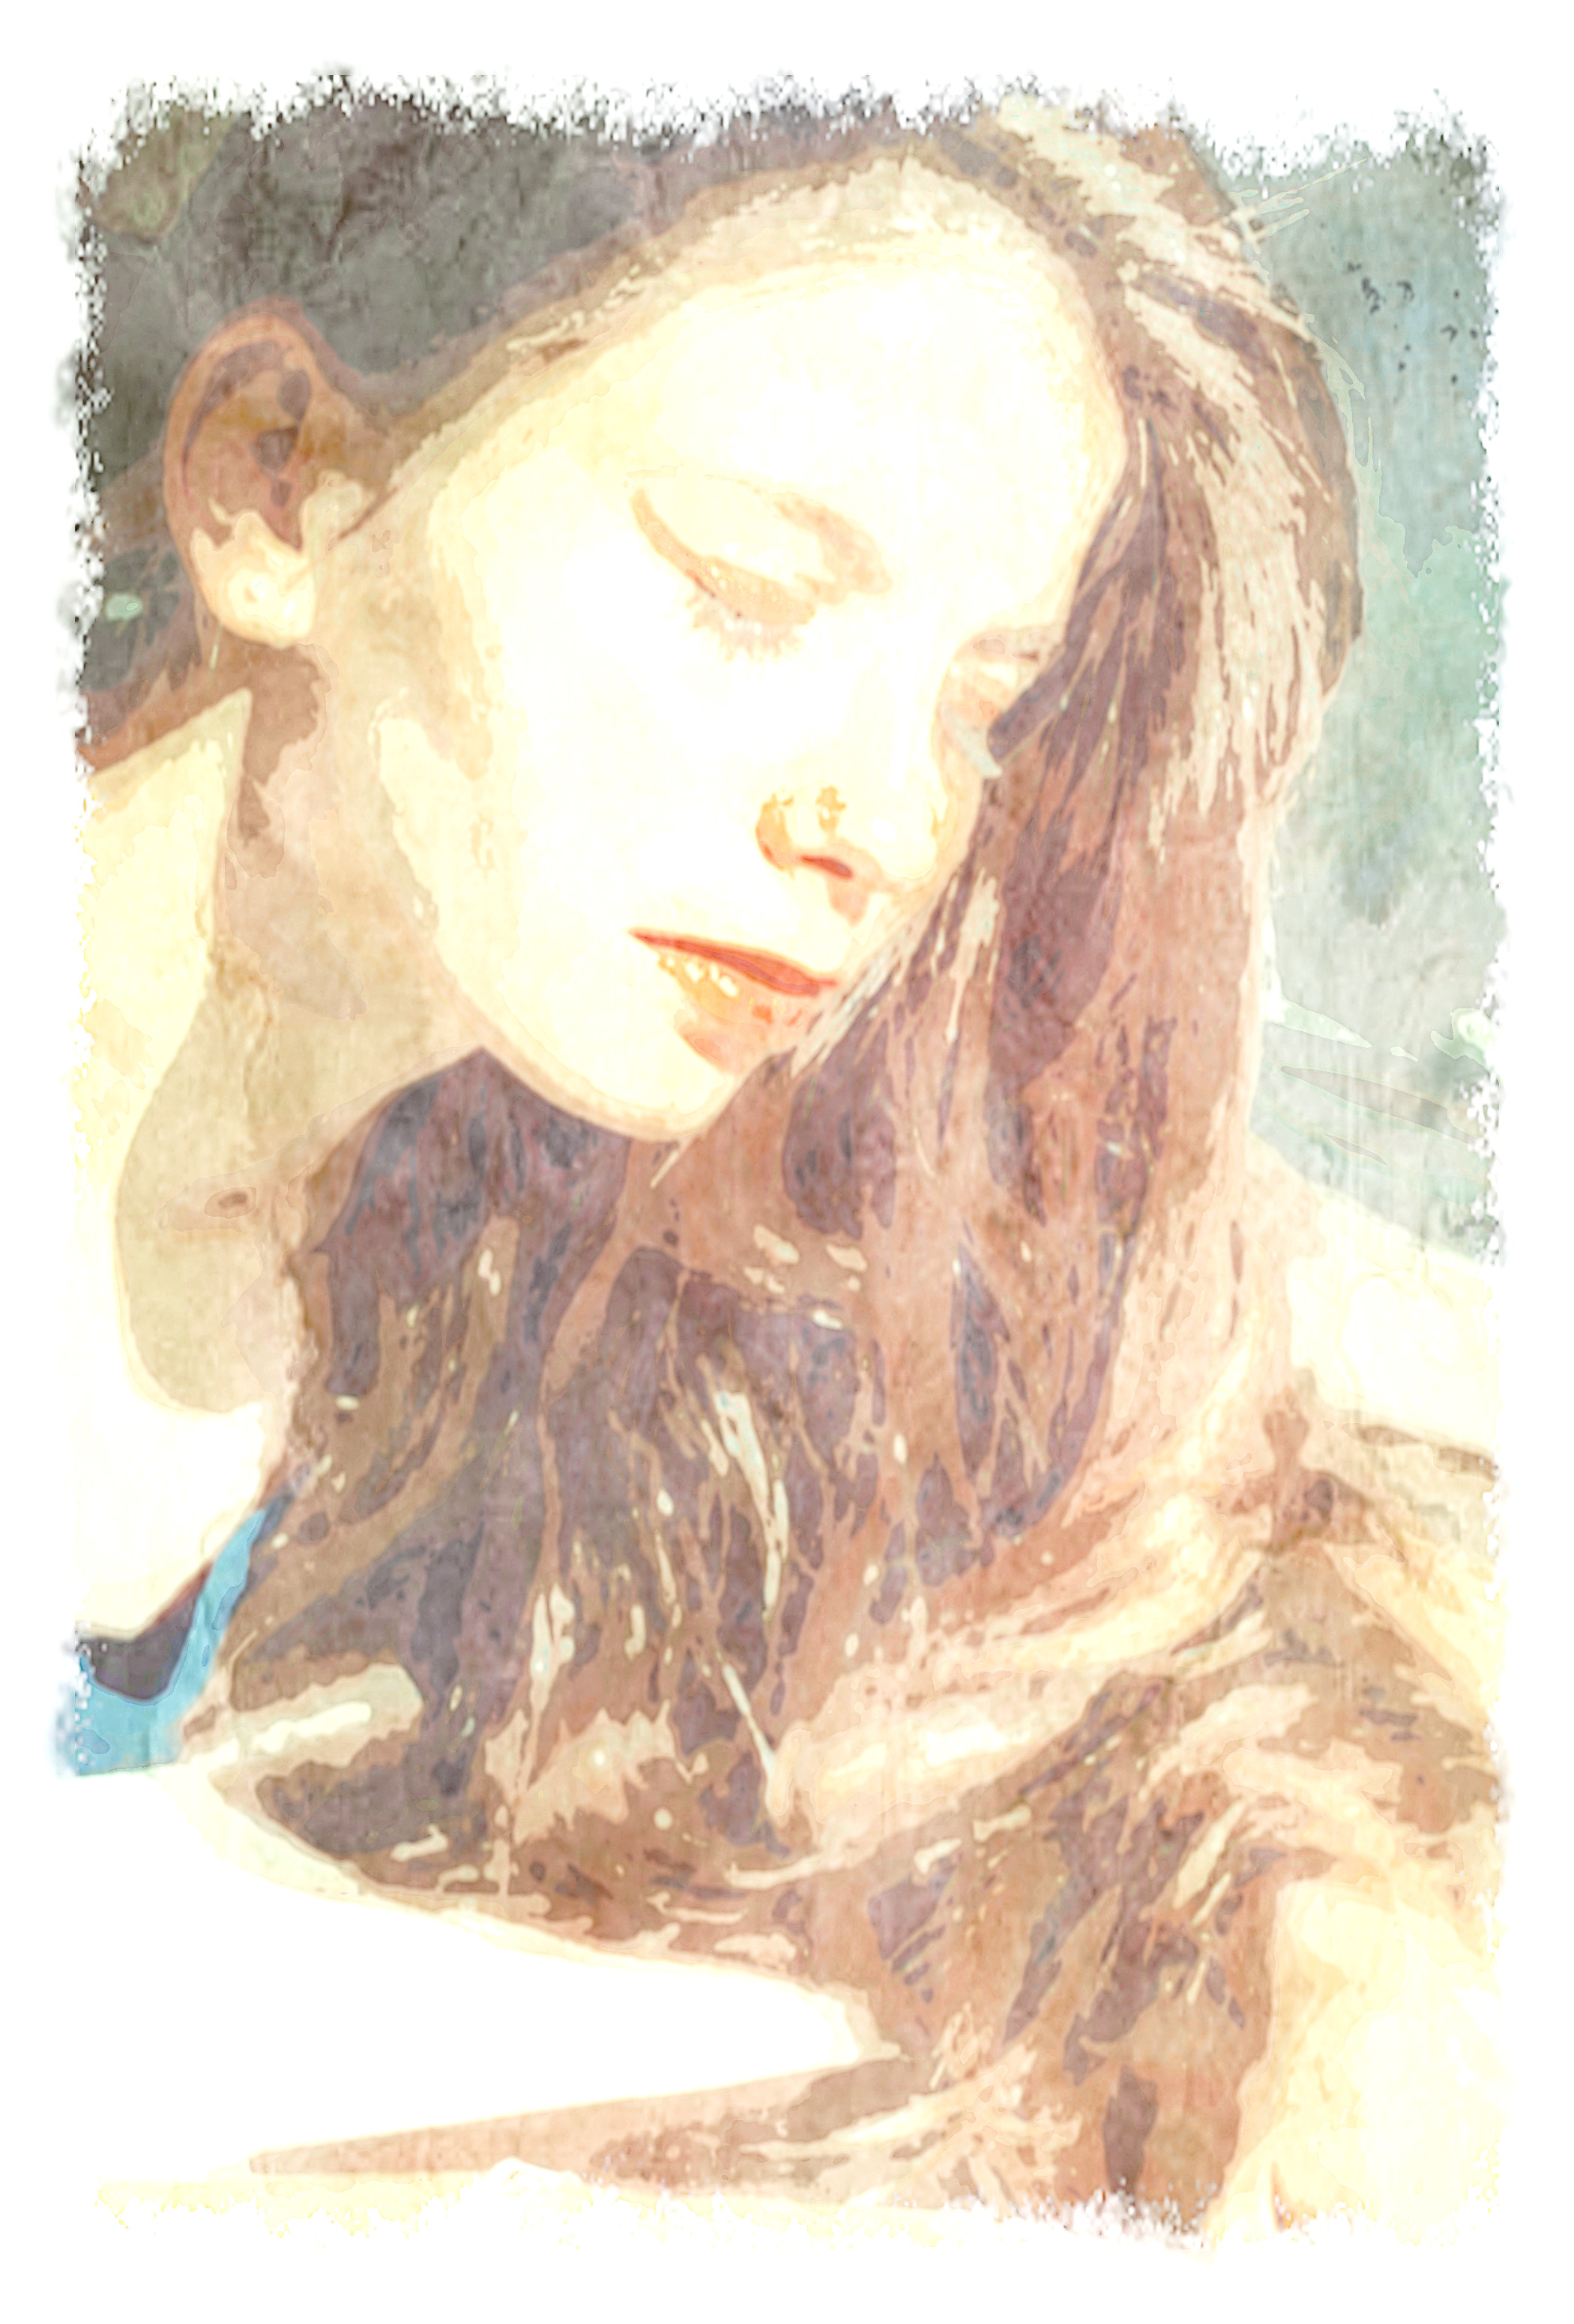 2020-03-22 10-36-33 close-up-photo-of-woman-in-blue-shirt-lying-in-bed-with-her-3770360 as a digital aquarel, using18 colours, source portrait, look delicate plus.jpg